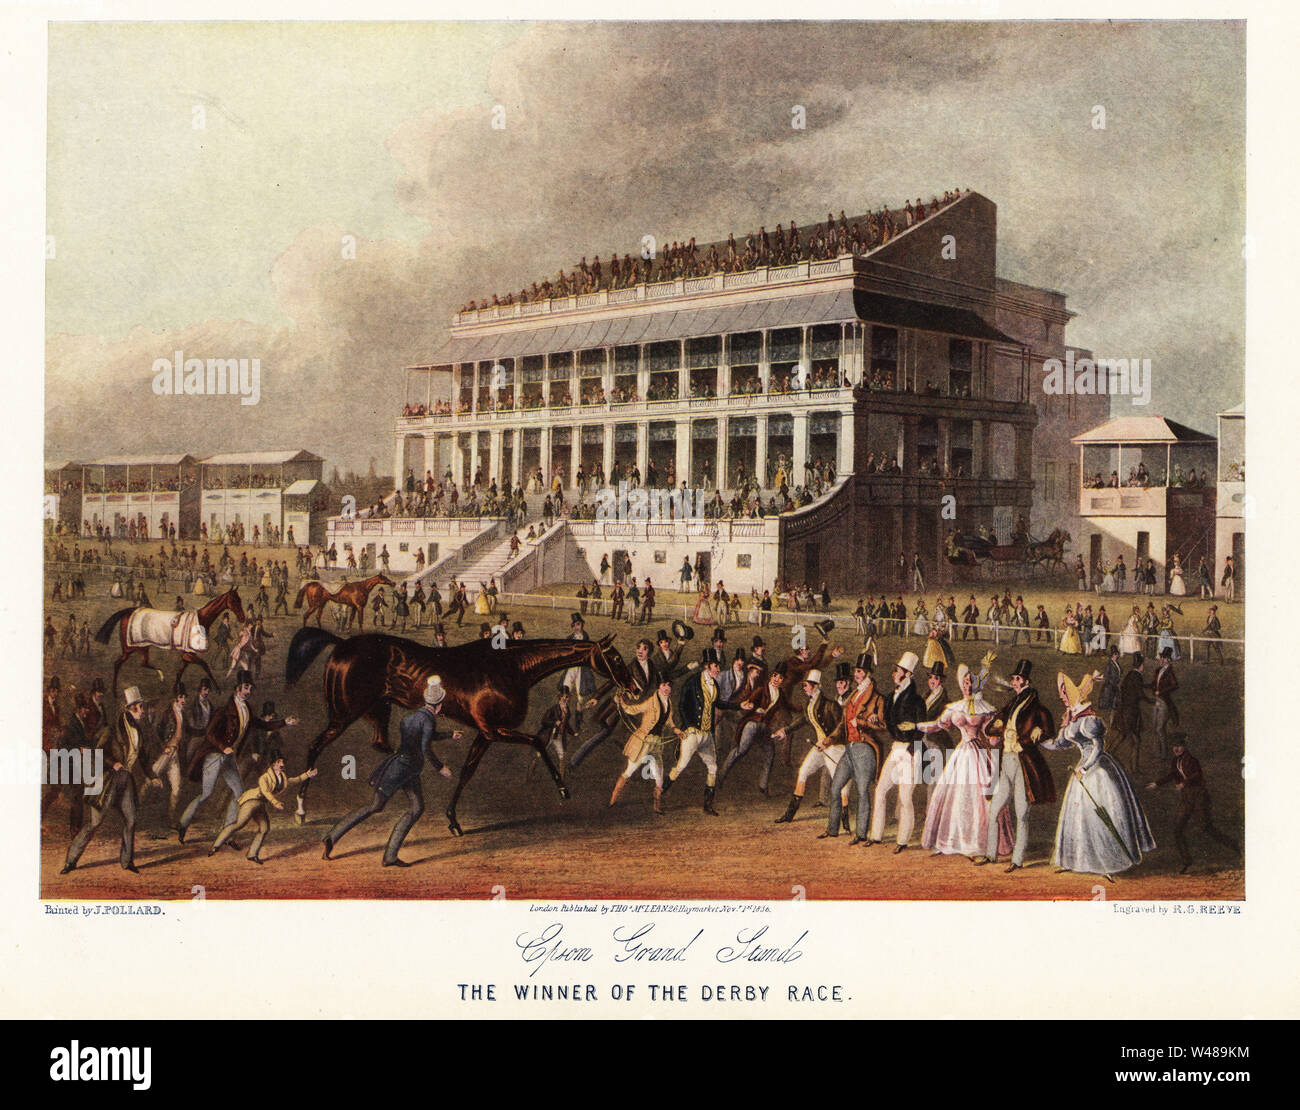 Bay Middleton, winner of the Derby 1836, being led to the paddock at Epsom Racecourse in front of fashionable crowds in the Grand Stand. Color print after an engraving by R.G. Reeve from a painting by James Pollard in Ralph Nevill’s Old Sporting Prints, The Connoisseur Magazine, London, 1908. Stock Photo